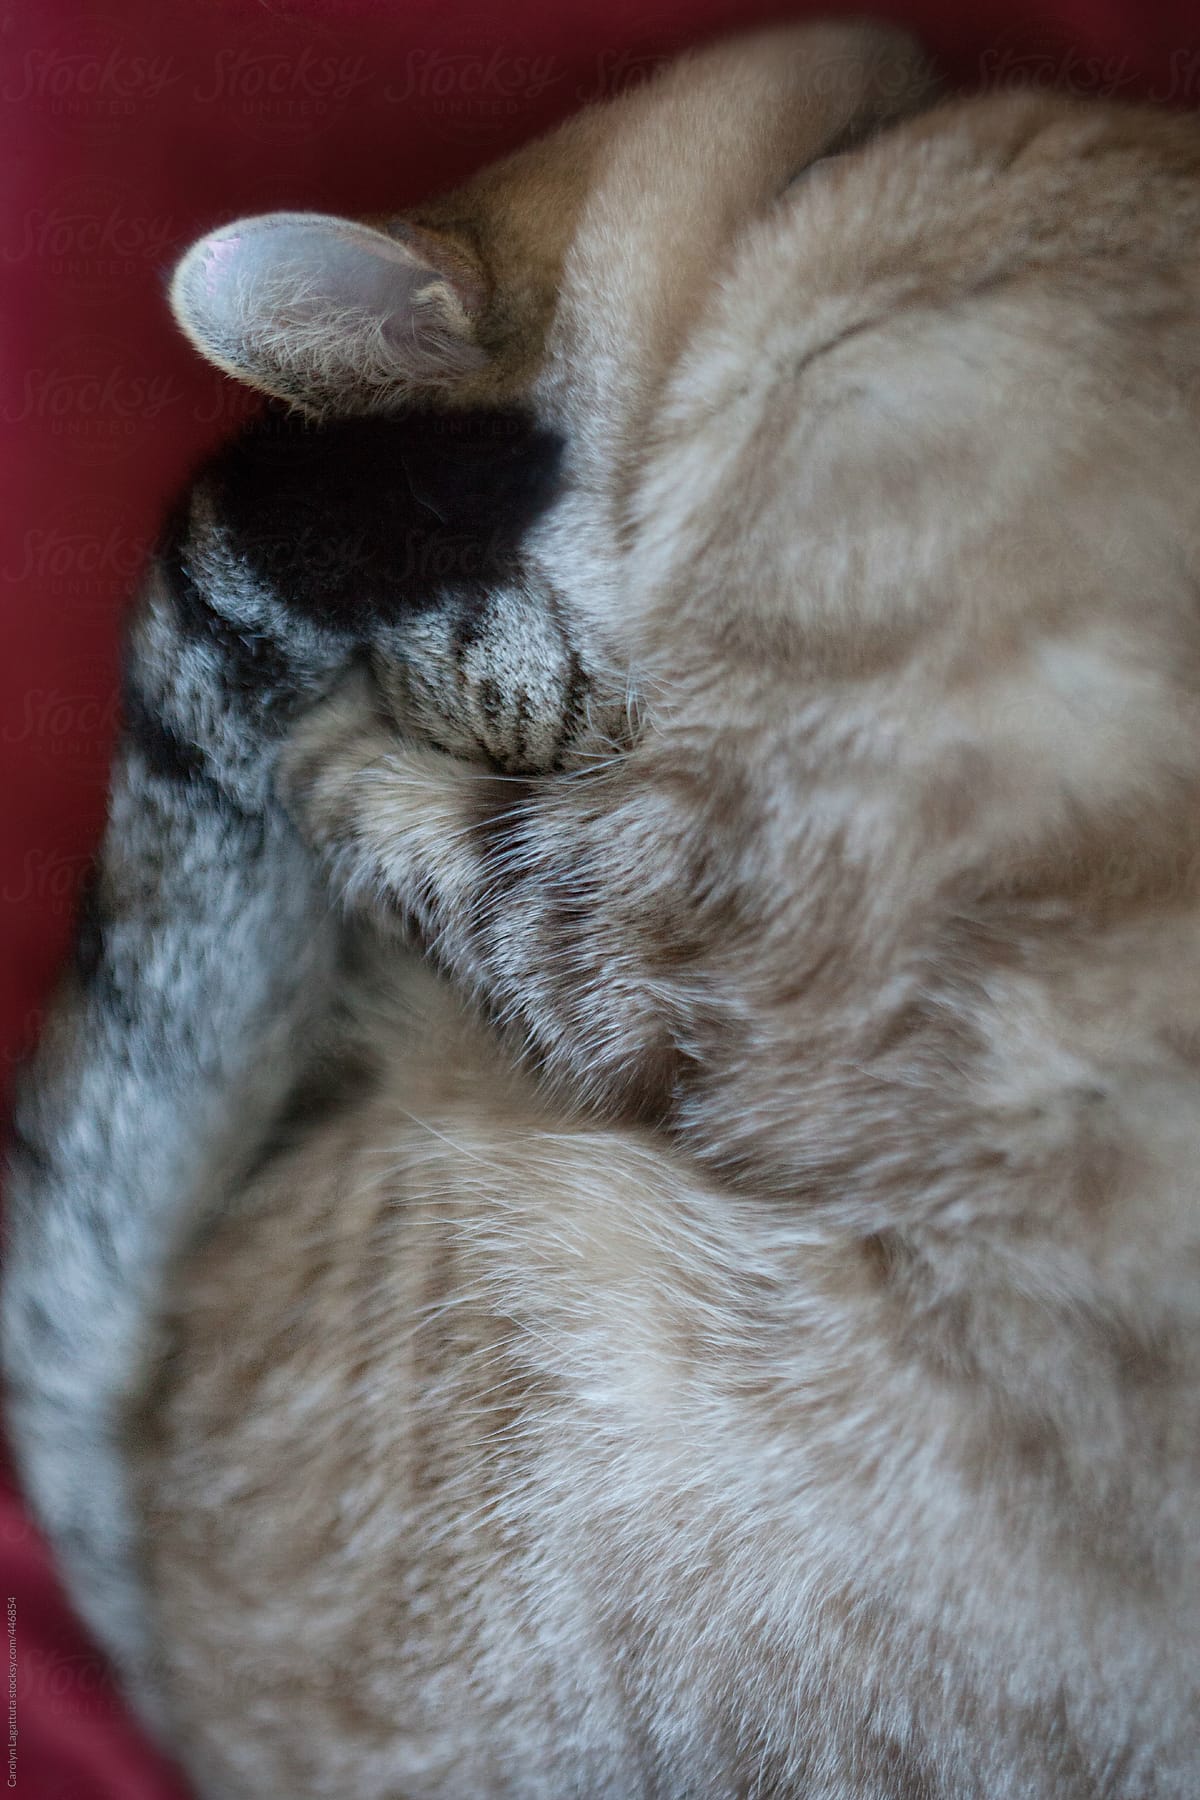 Siamese cat curled up in a ball with her paws over her face